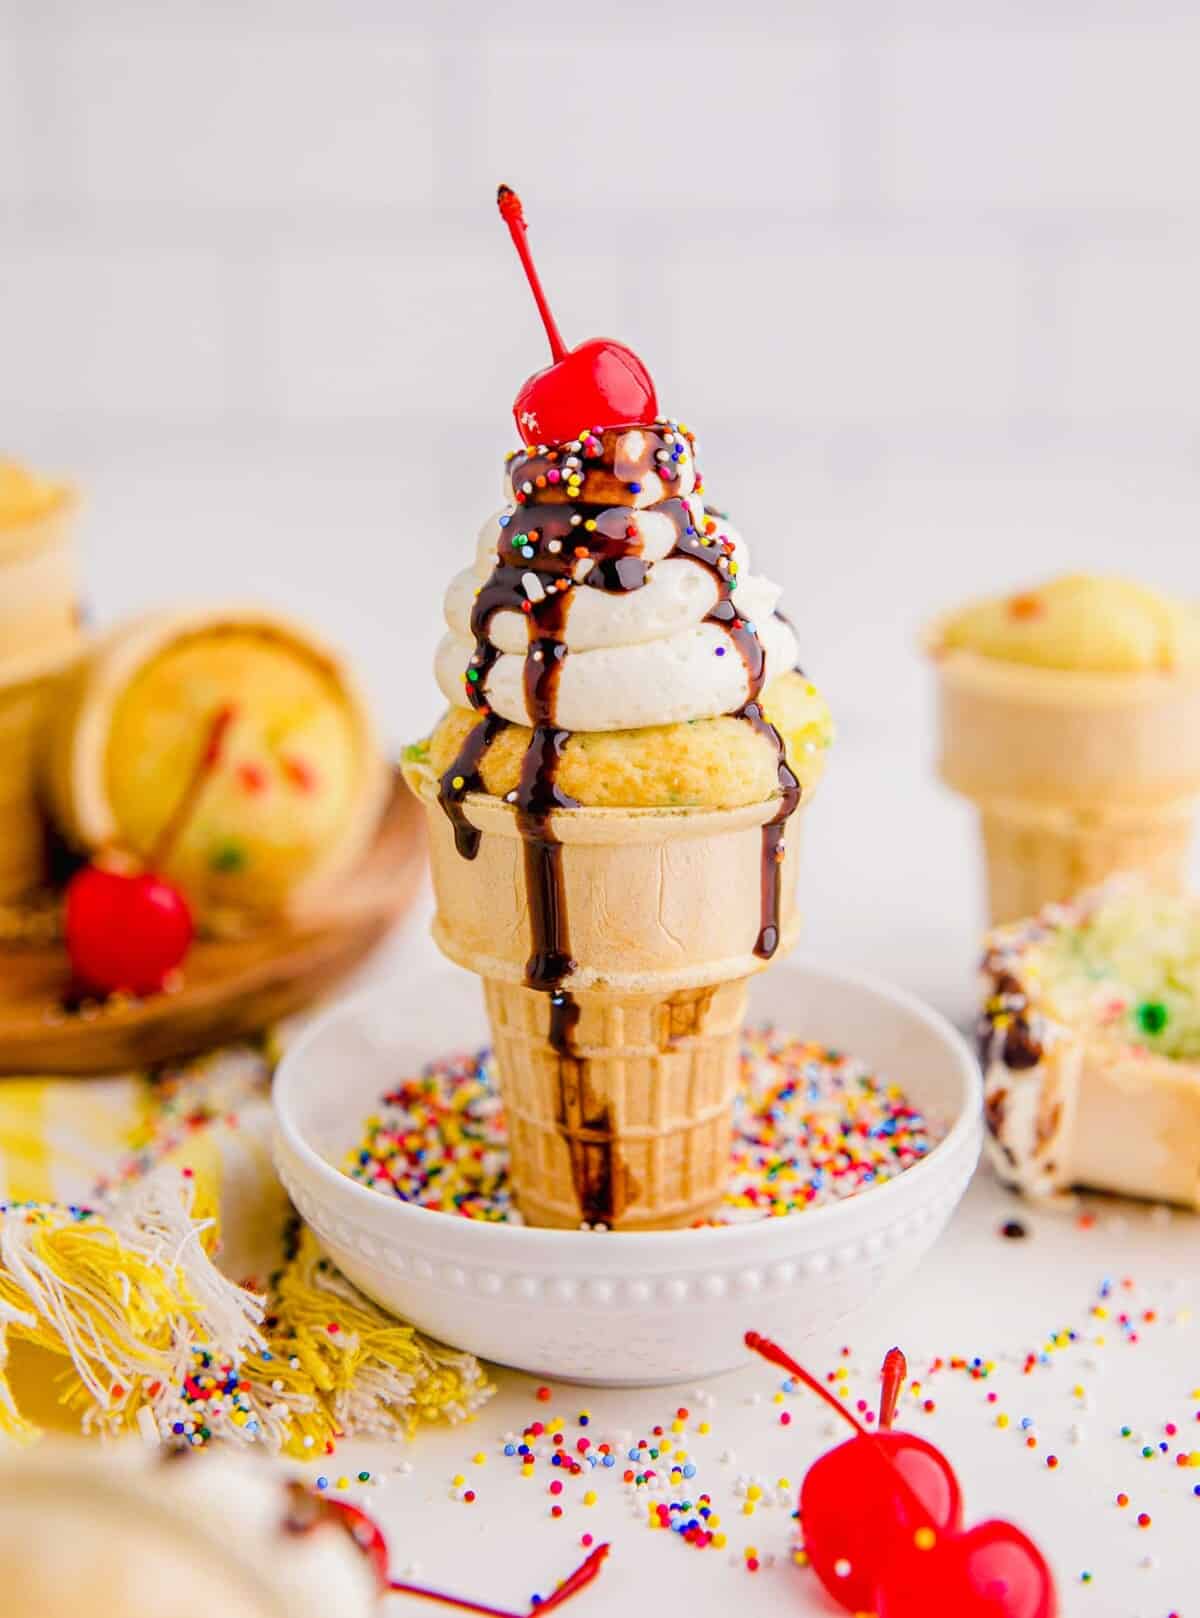 An ice cream cone cupcakes is standing in a small white bowl filled with rainbow sprinkles.